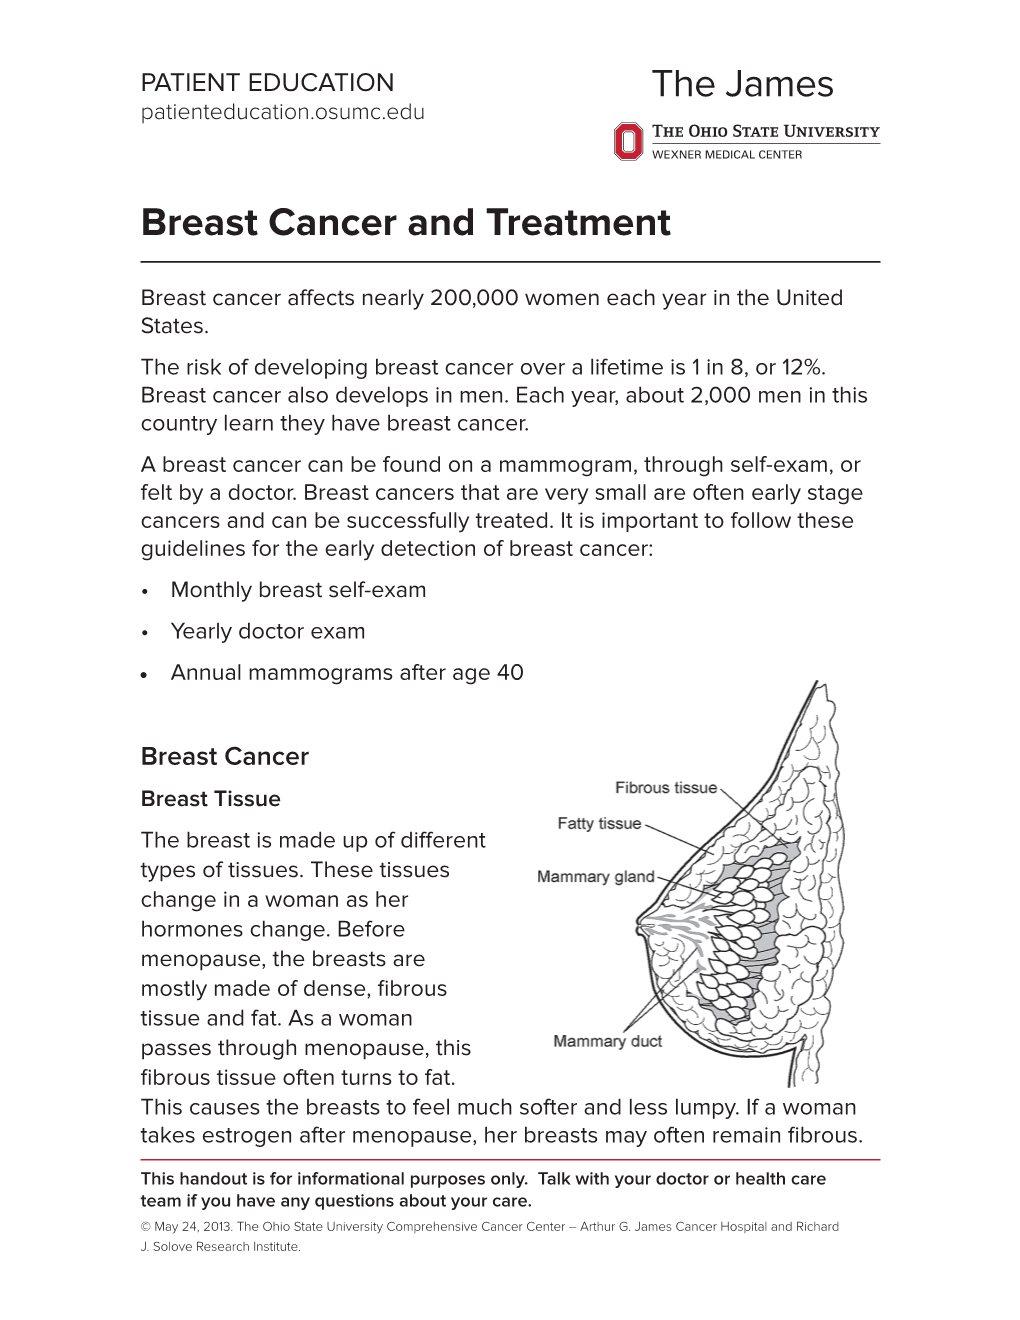 Breast Cancer and Treatment